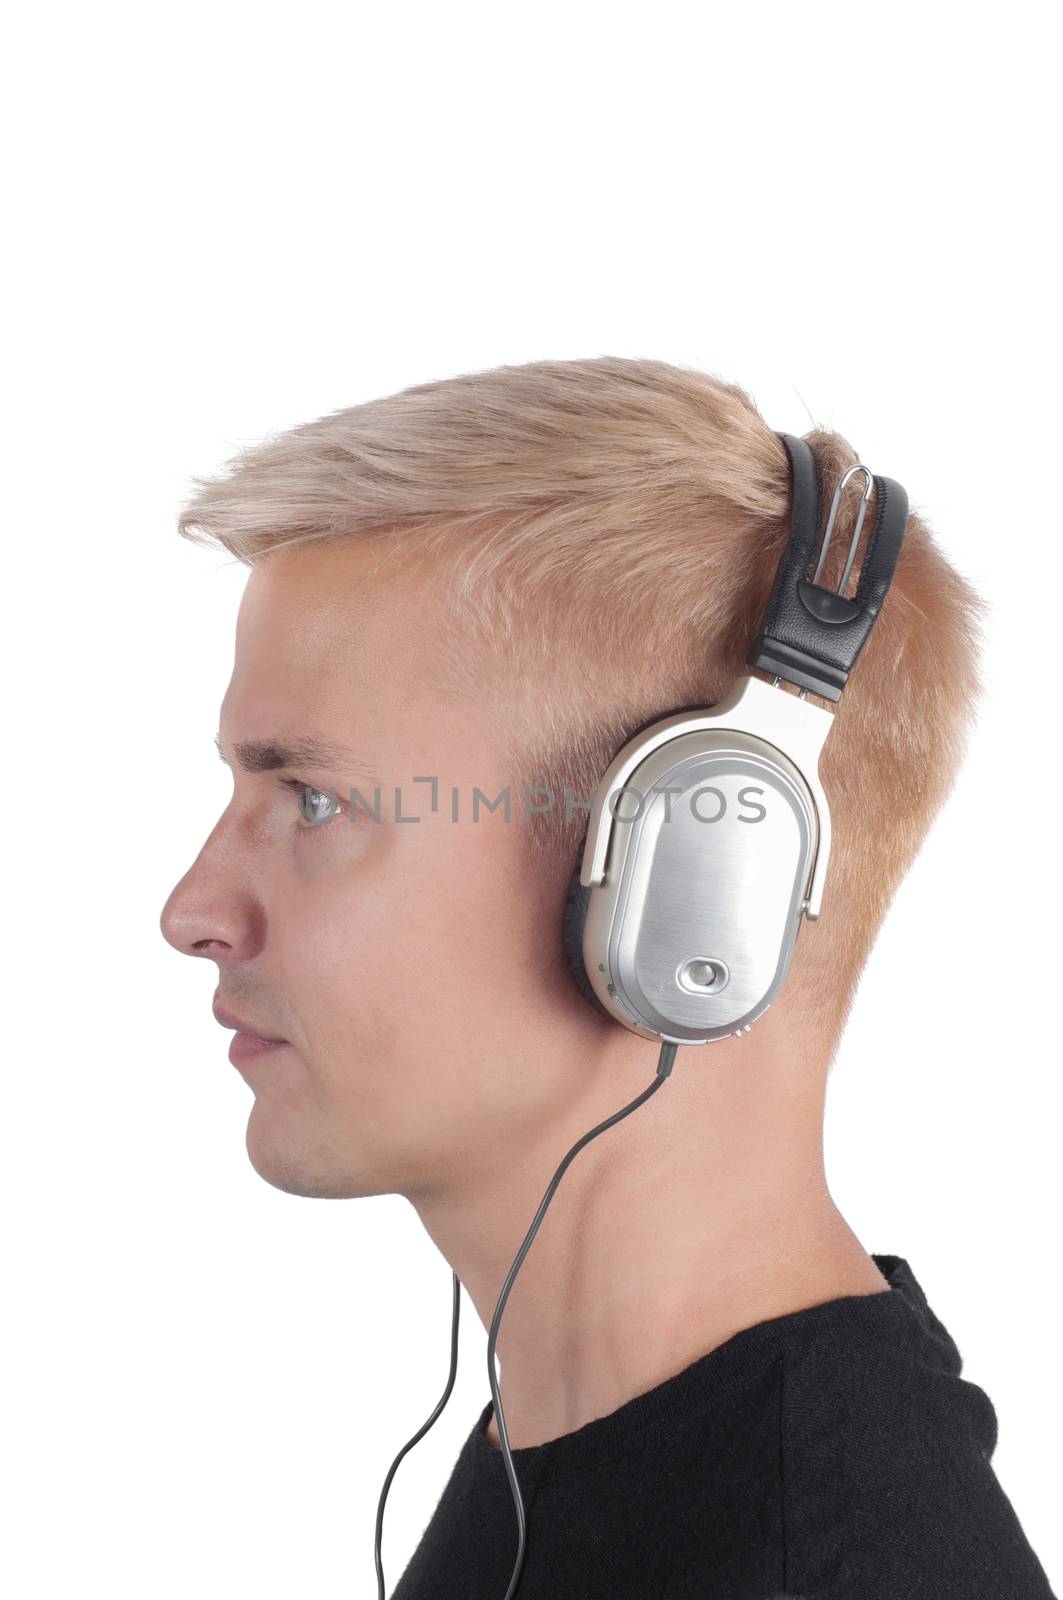 Guy in headphones, photo in profile by anytka